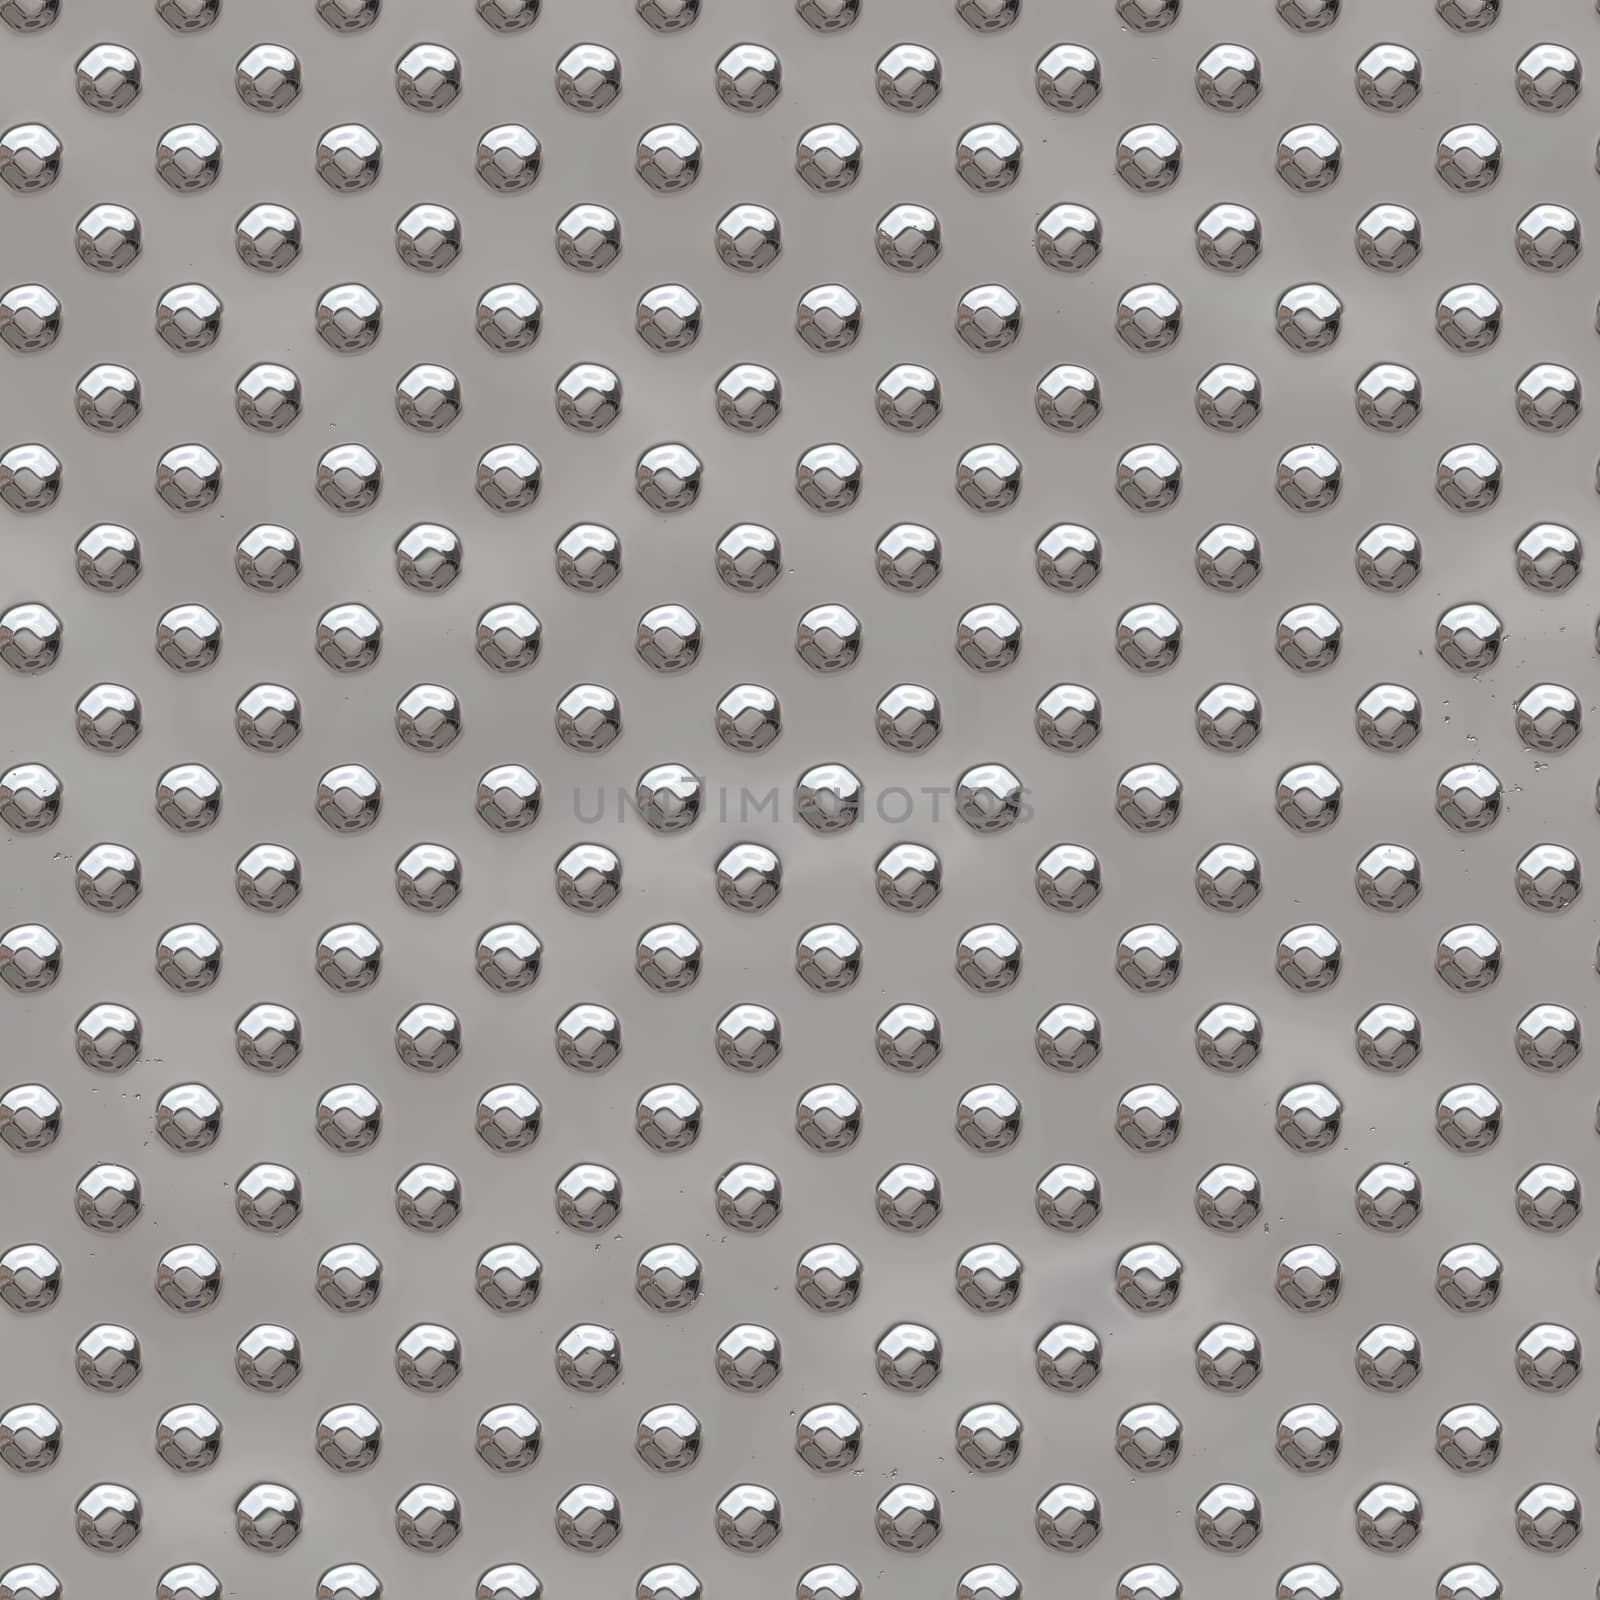 Silver Metal Plate Seamless Texture by whitechild